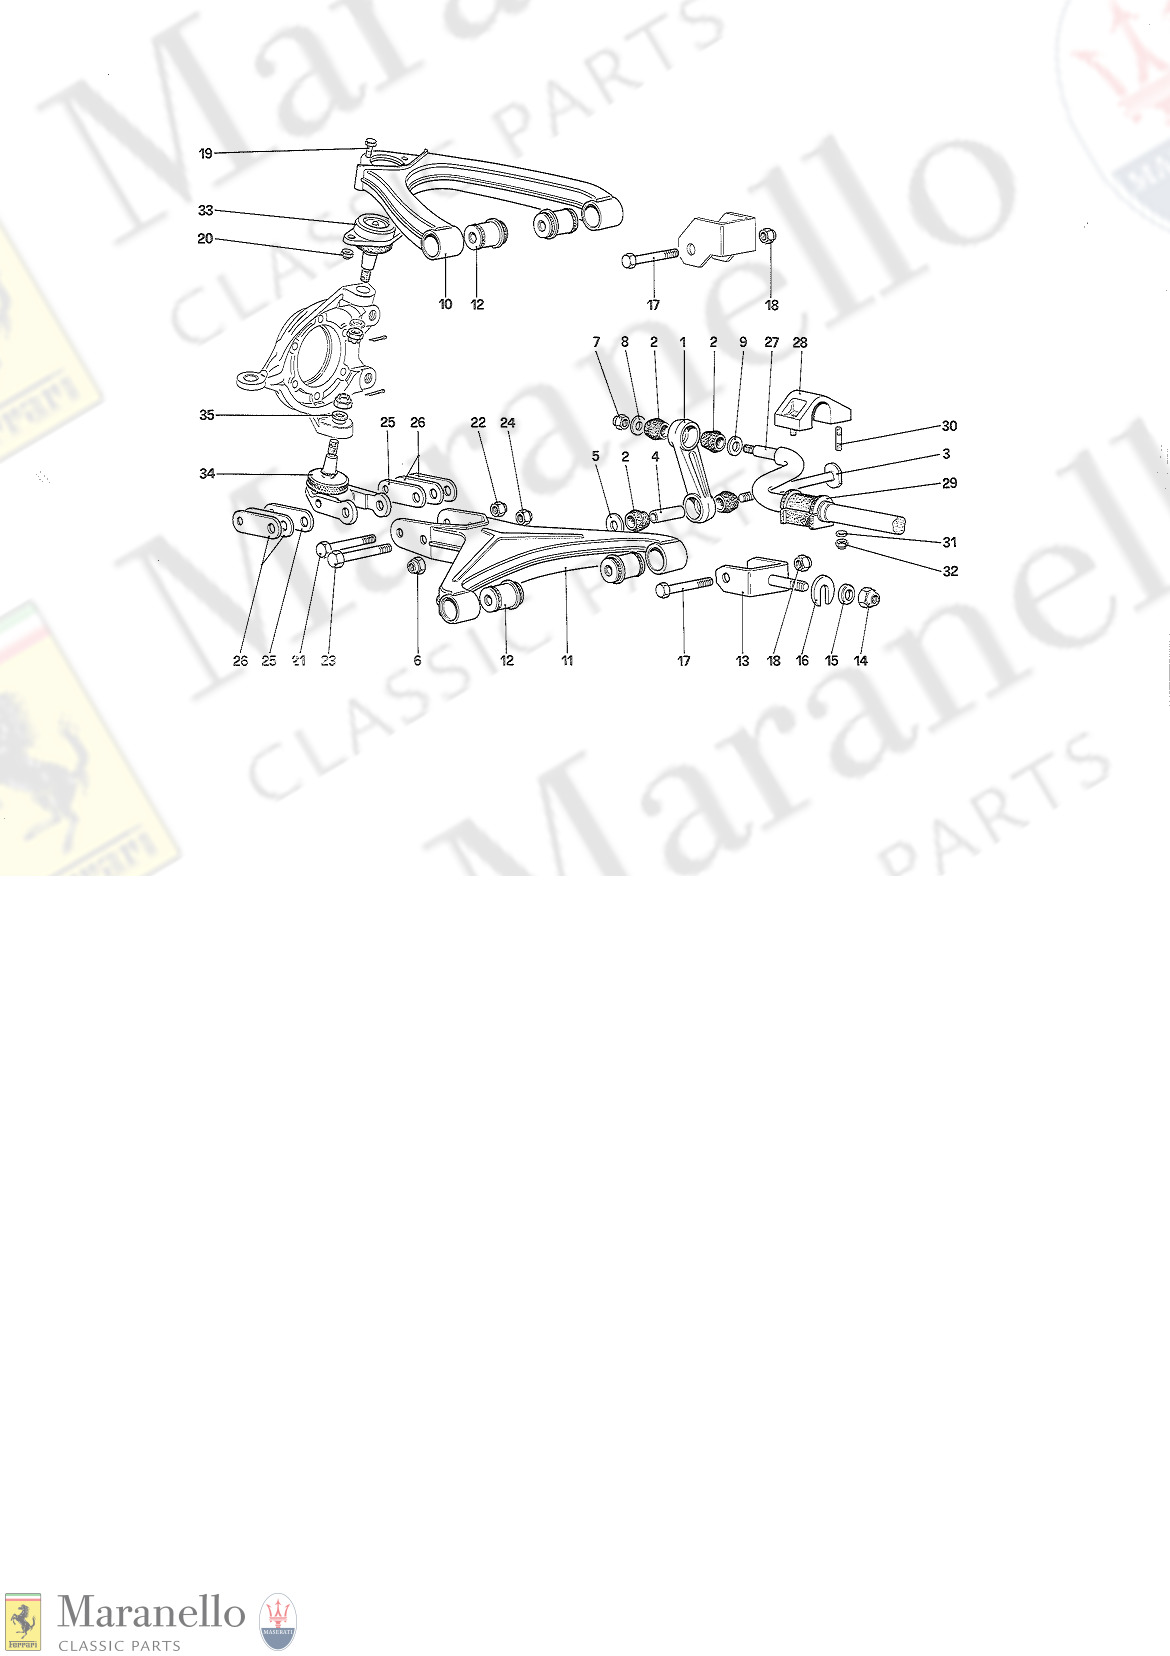 043A - Front Suspension - Wishbones - Starting From Car N 75997 (Apr89)